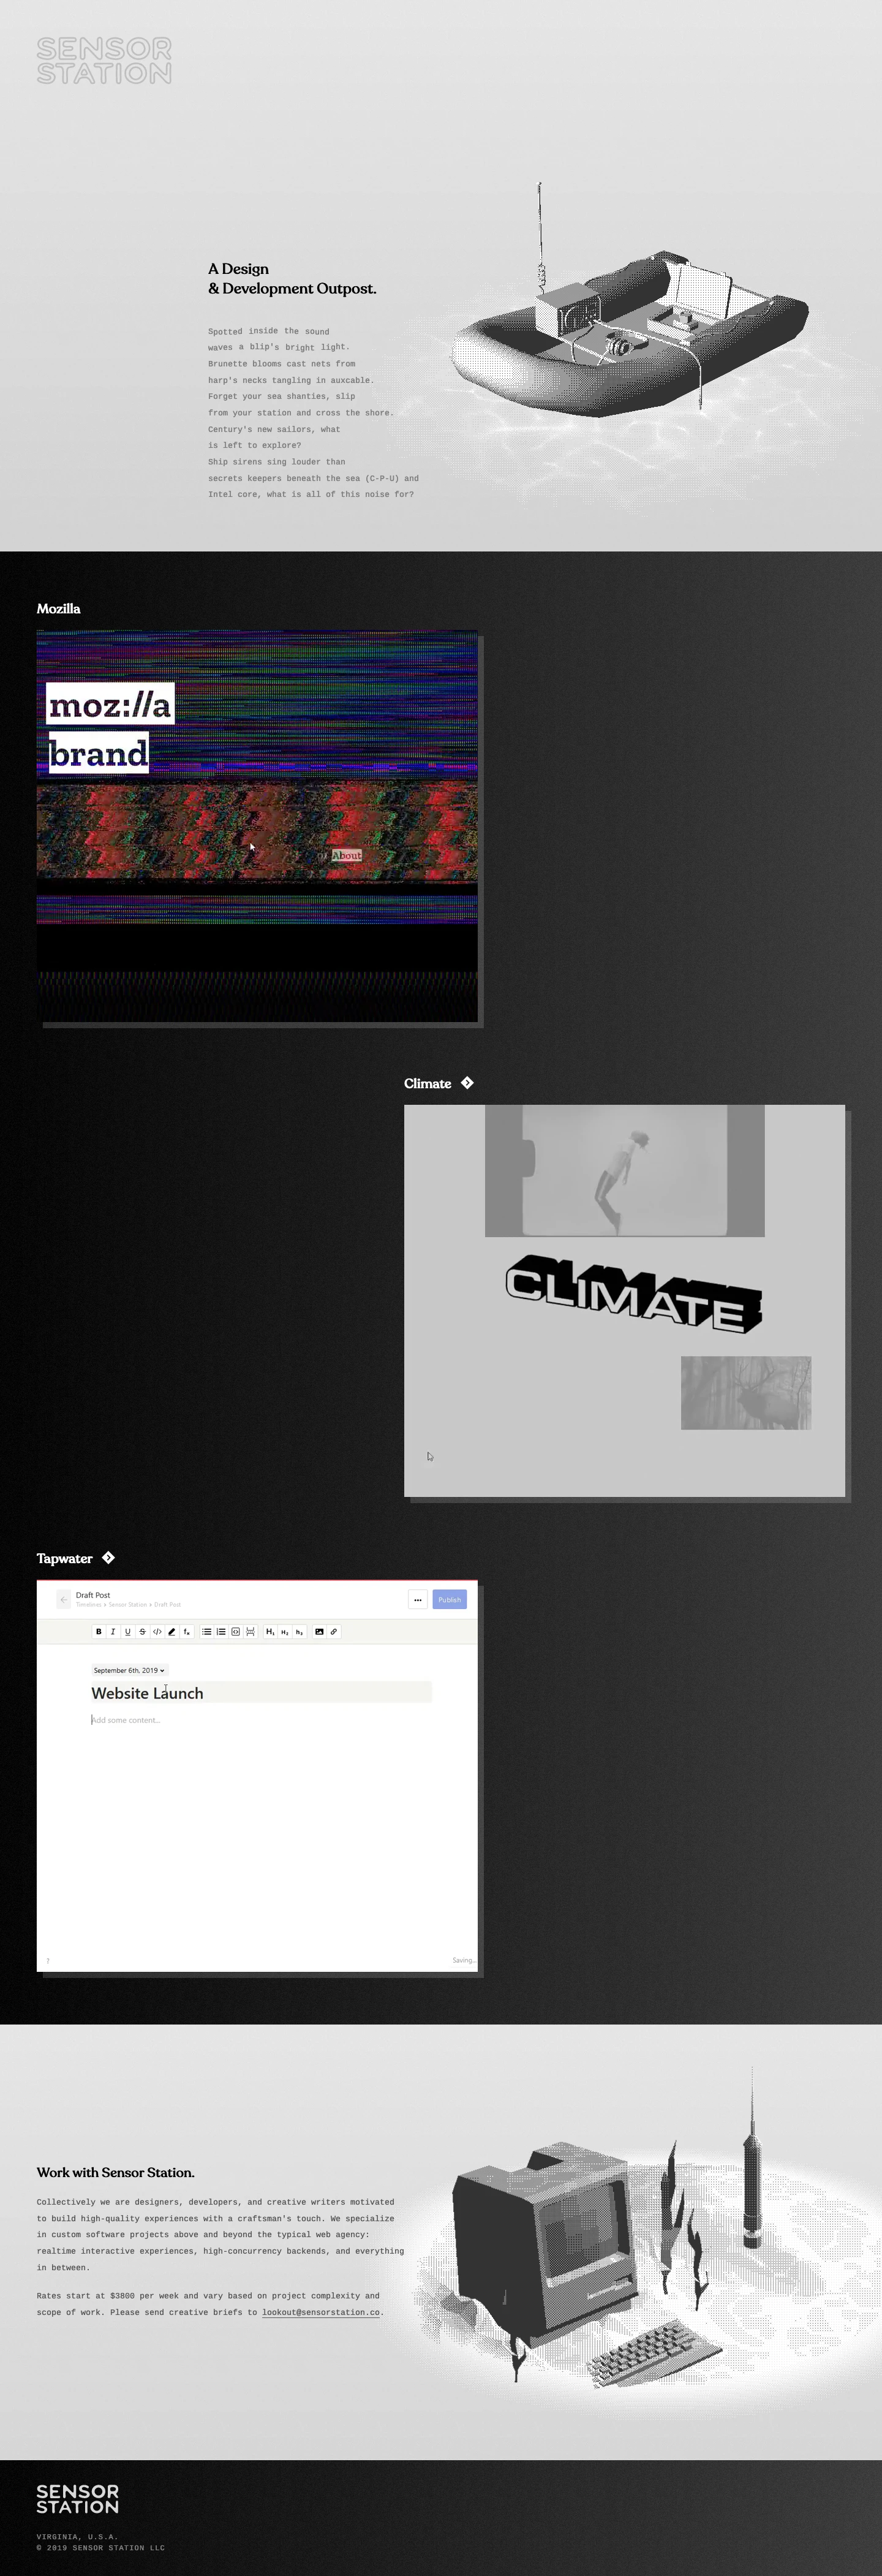 Sensor Station Landing Page Example: Collectively we are designers, developers, and creative writers motivated to build high-quality experiences with a craftsman's touch. We specialize in custom software projects above and beyond the typical web agency: realtime interactive experiences, high-concurrency backends, and everything in between